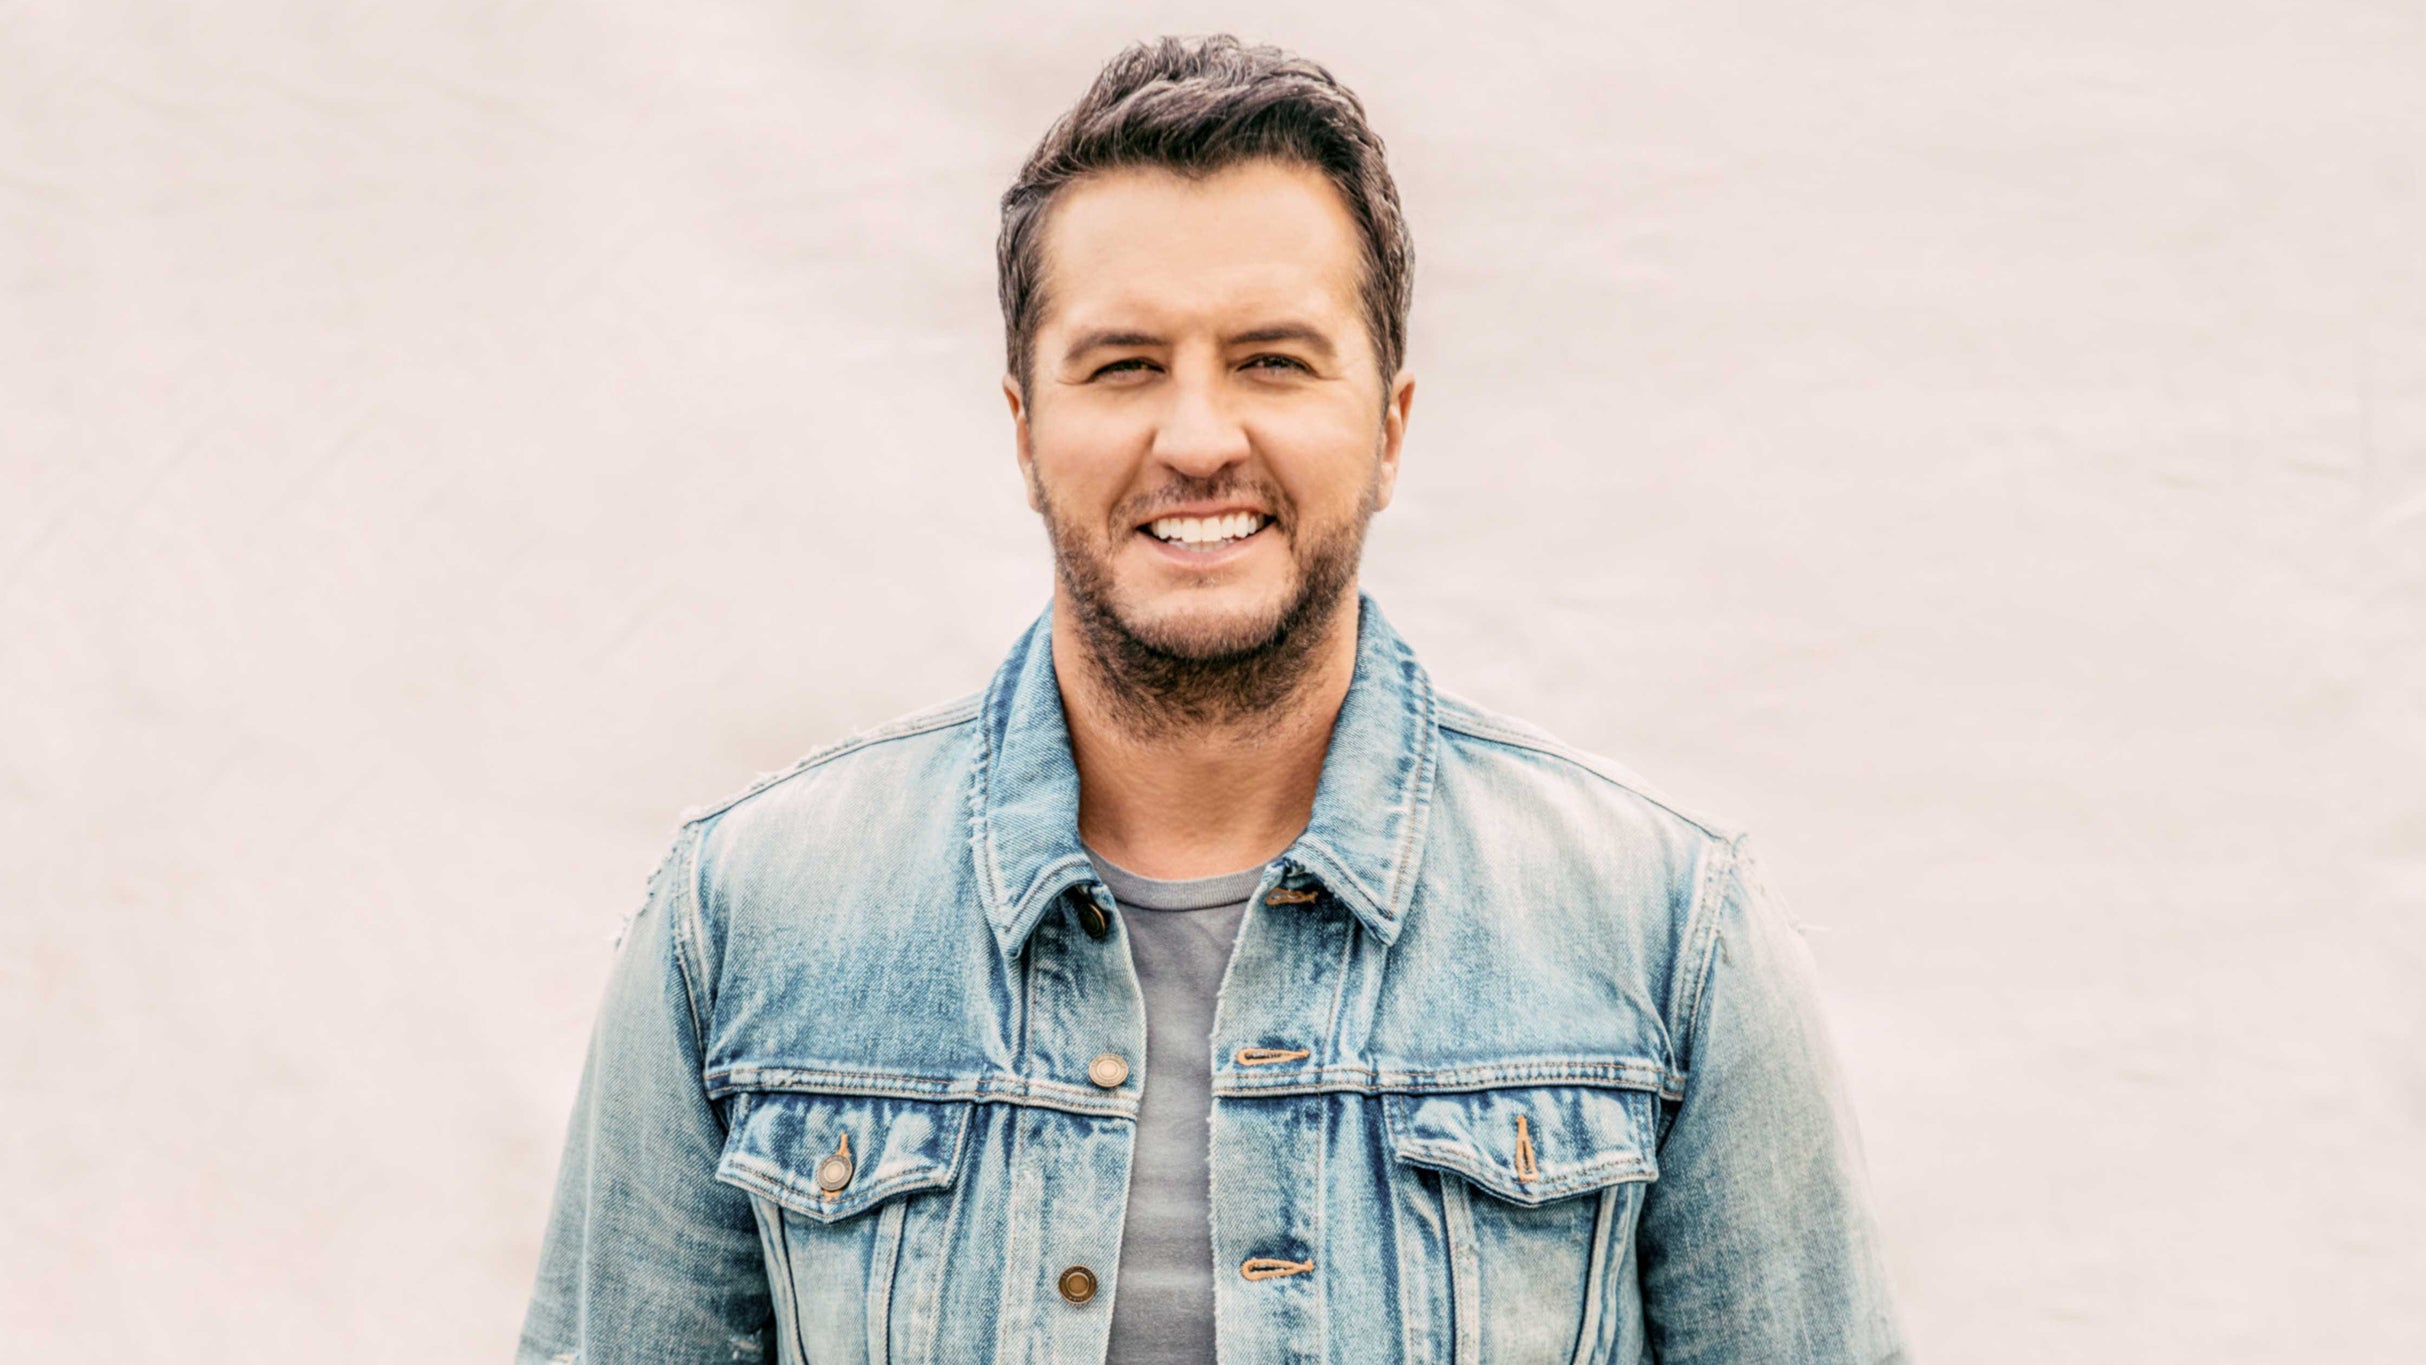 Luke Bryan: Country On Tour 2023 free presale c0de for early tickets in Toronto